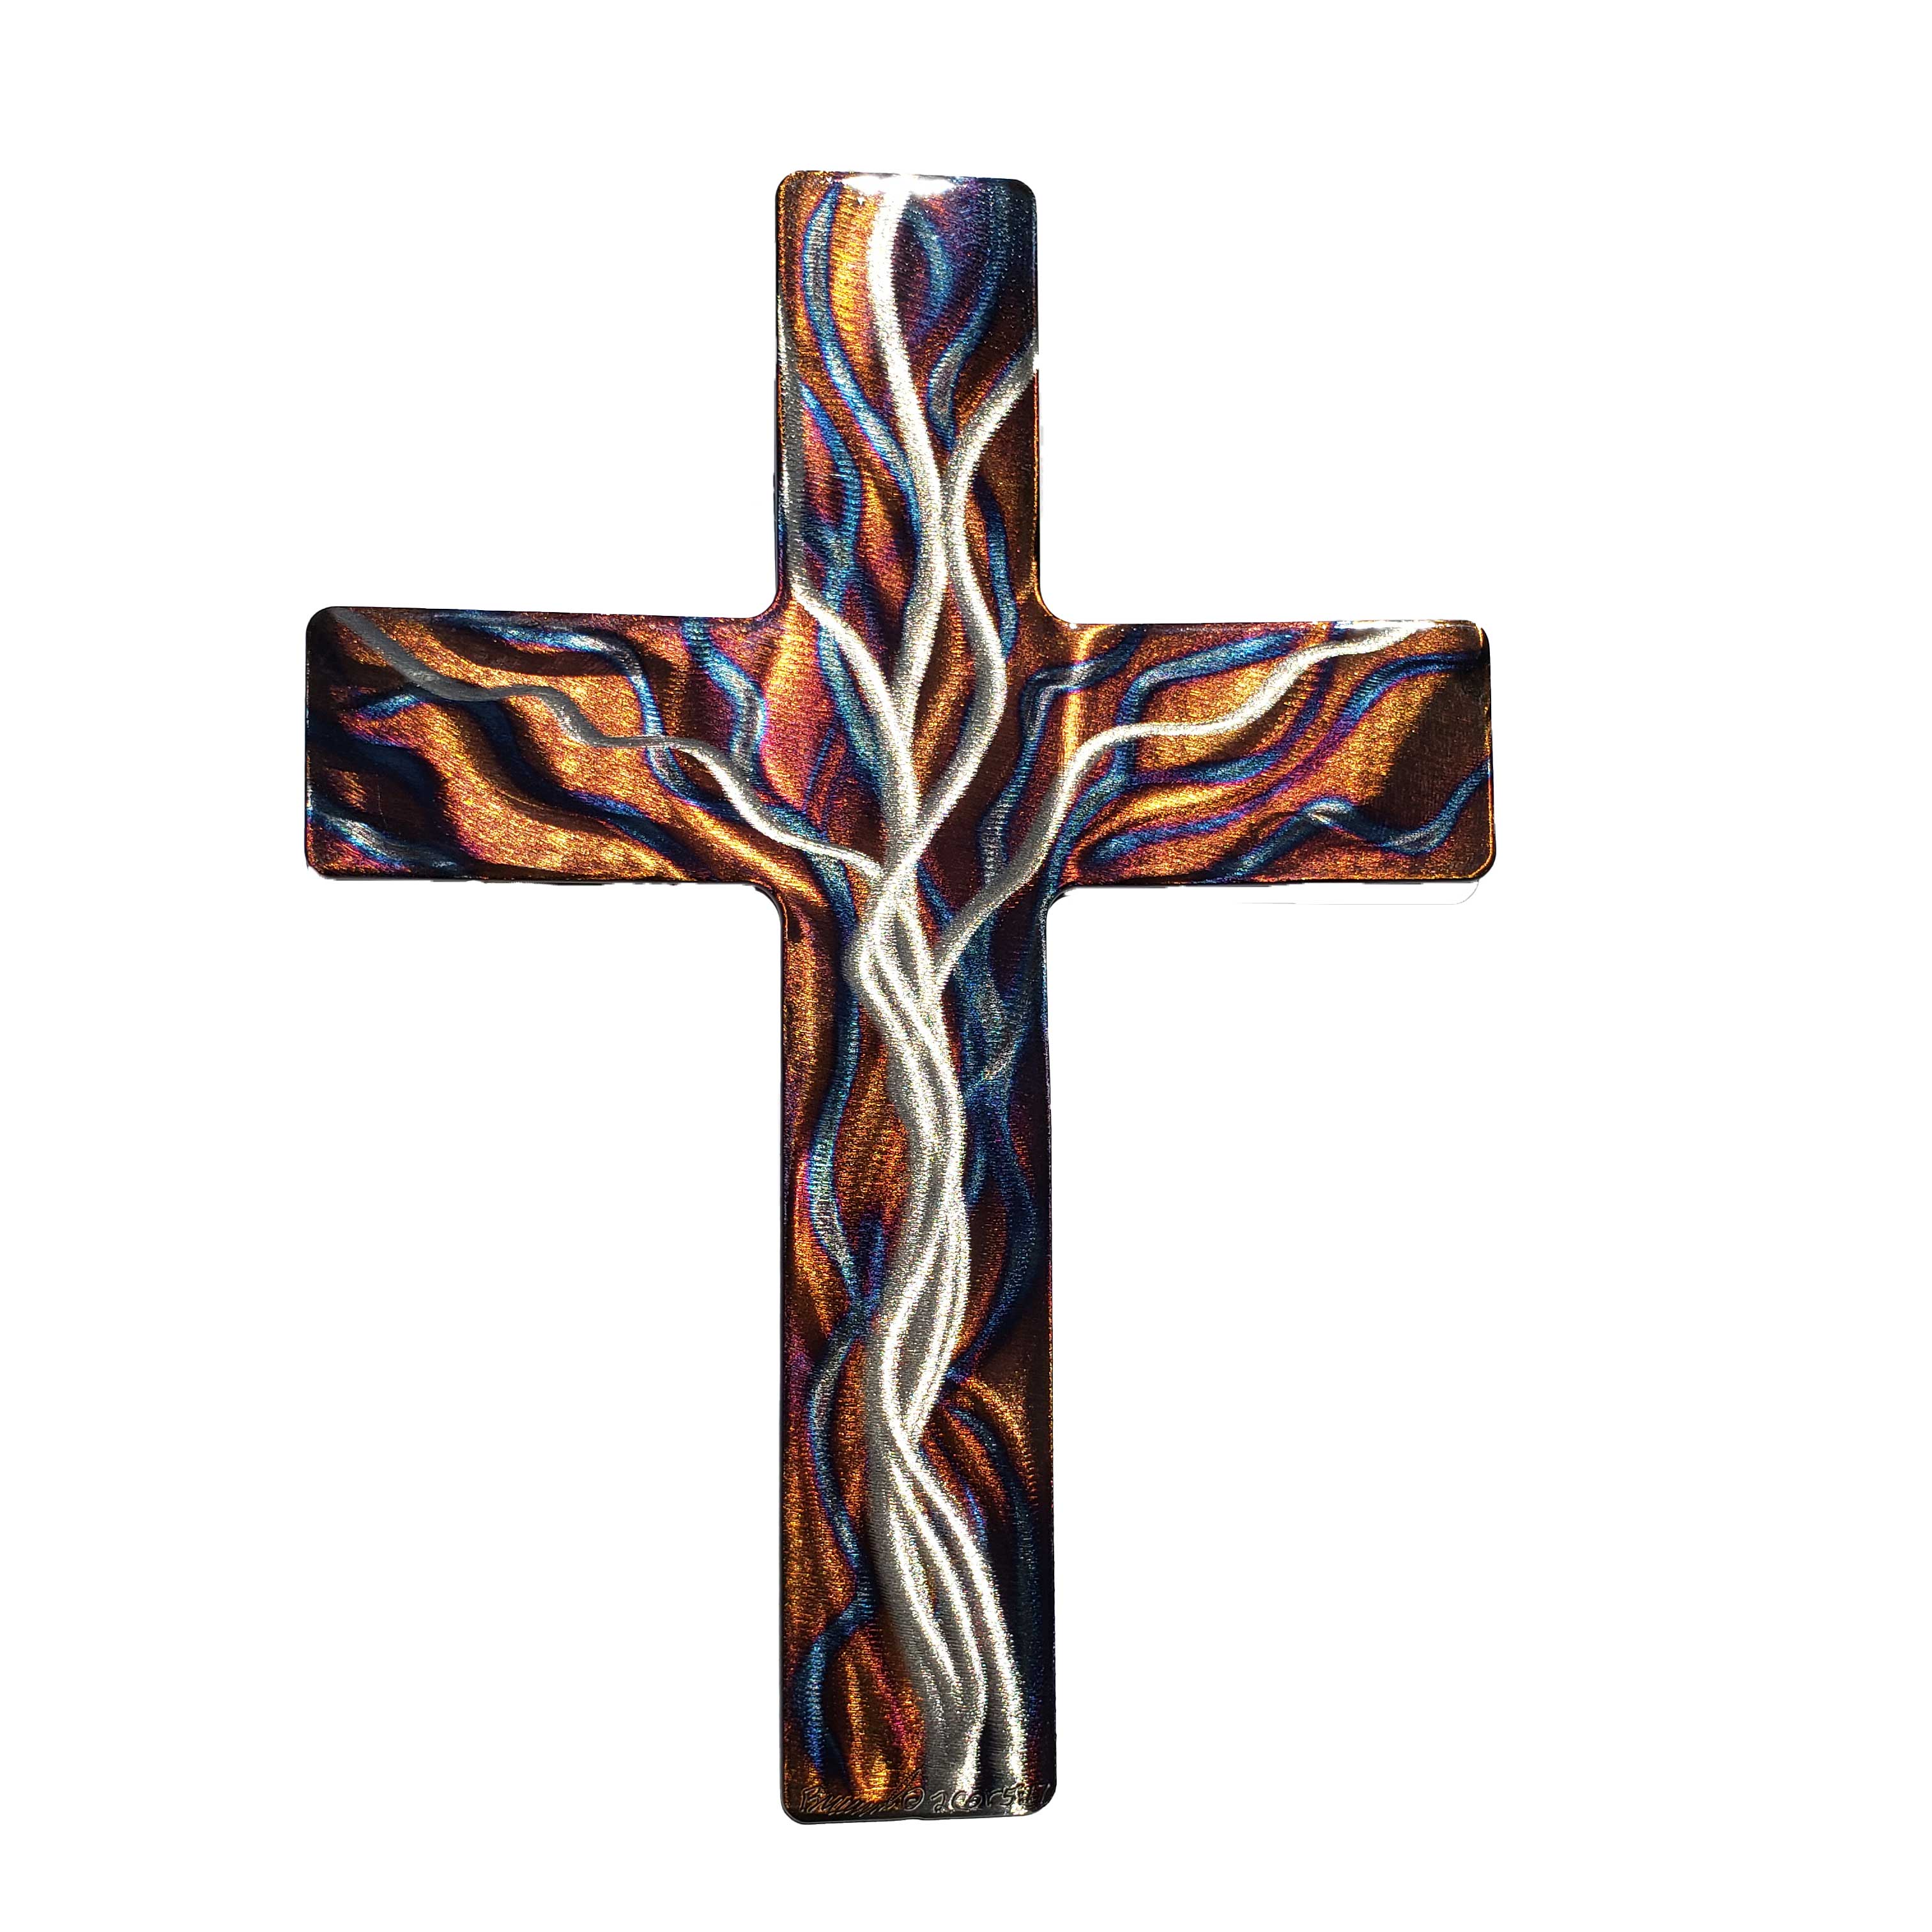 Flame-Painted Fire Cross by David Broussard